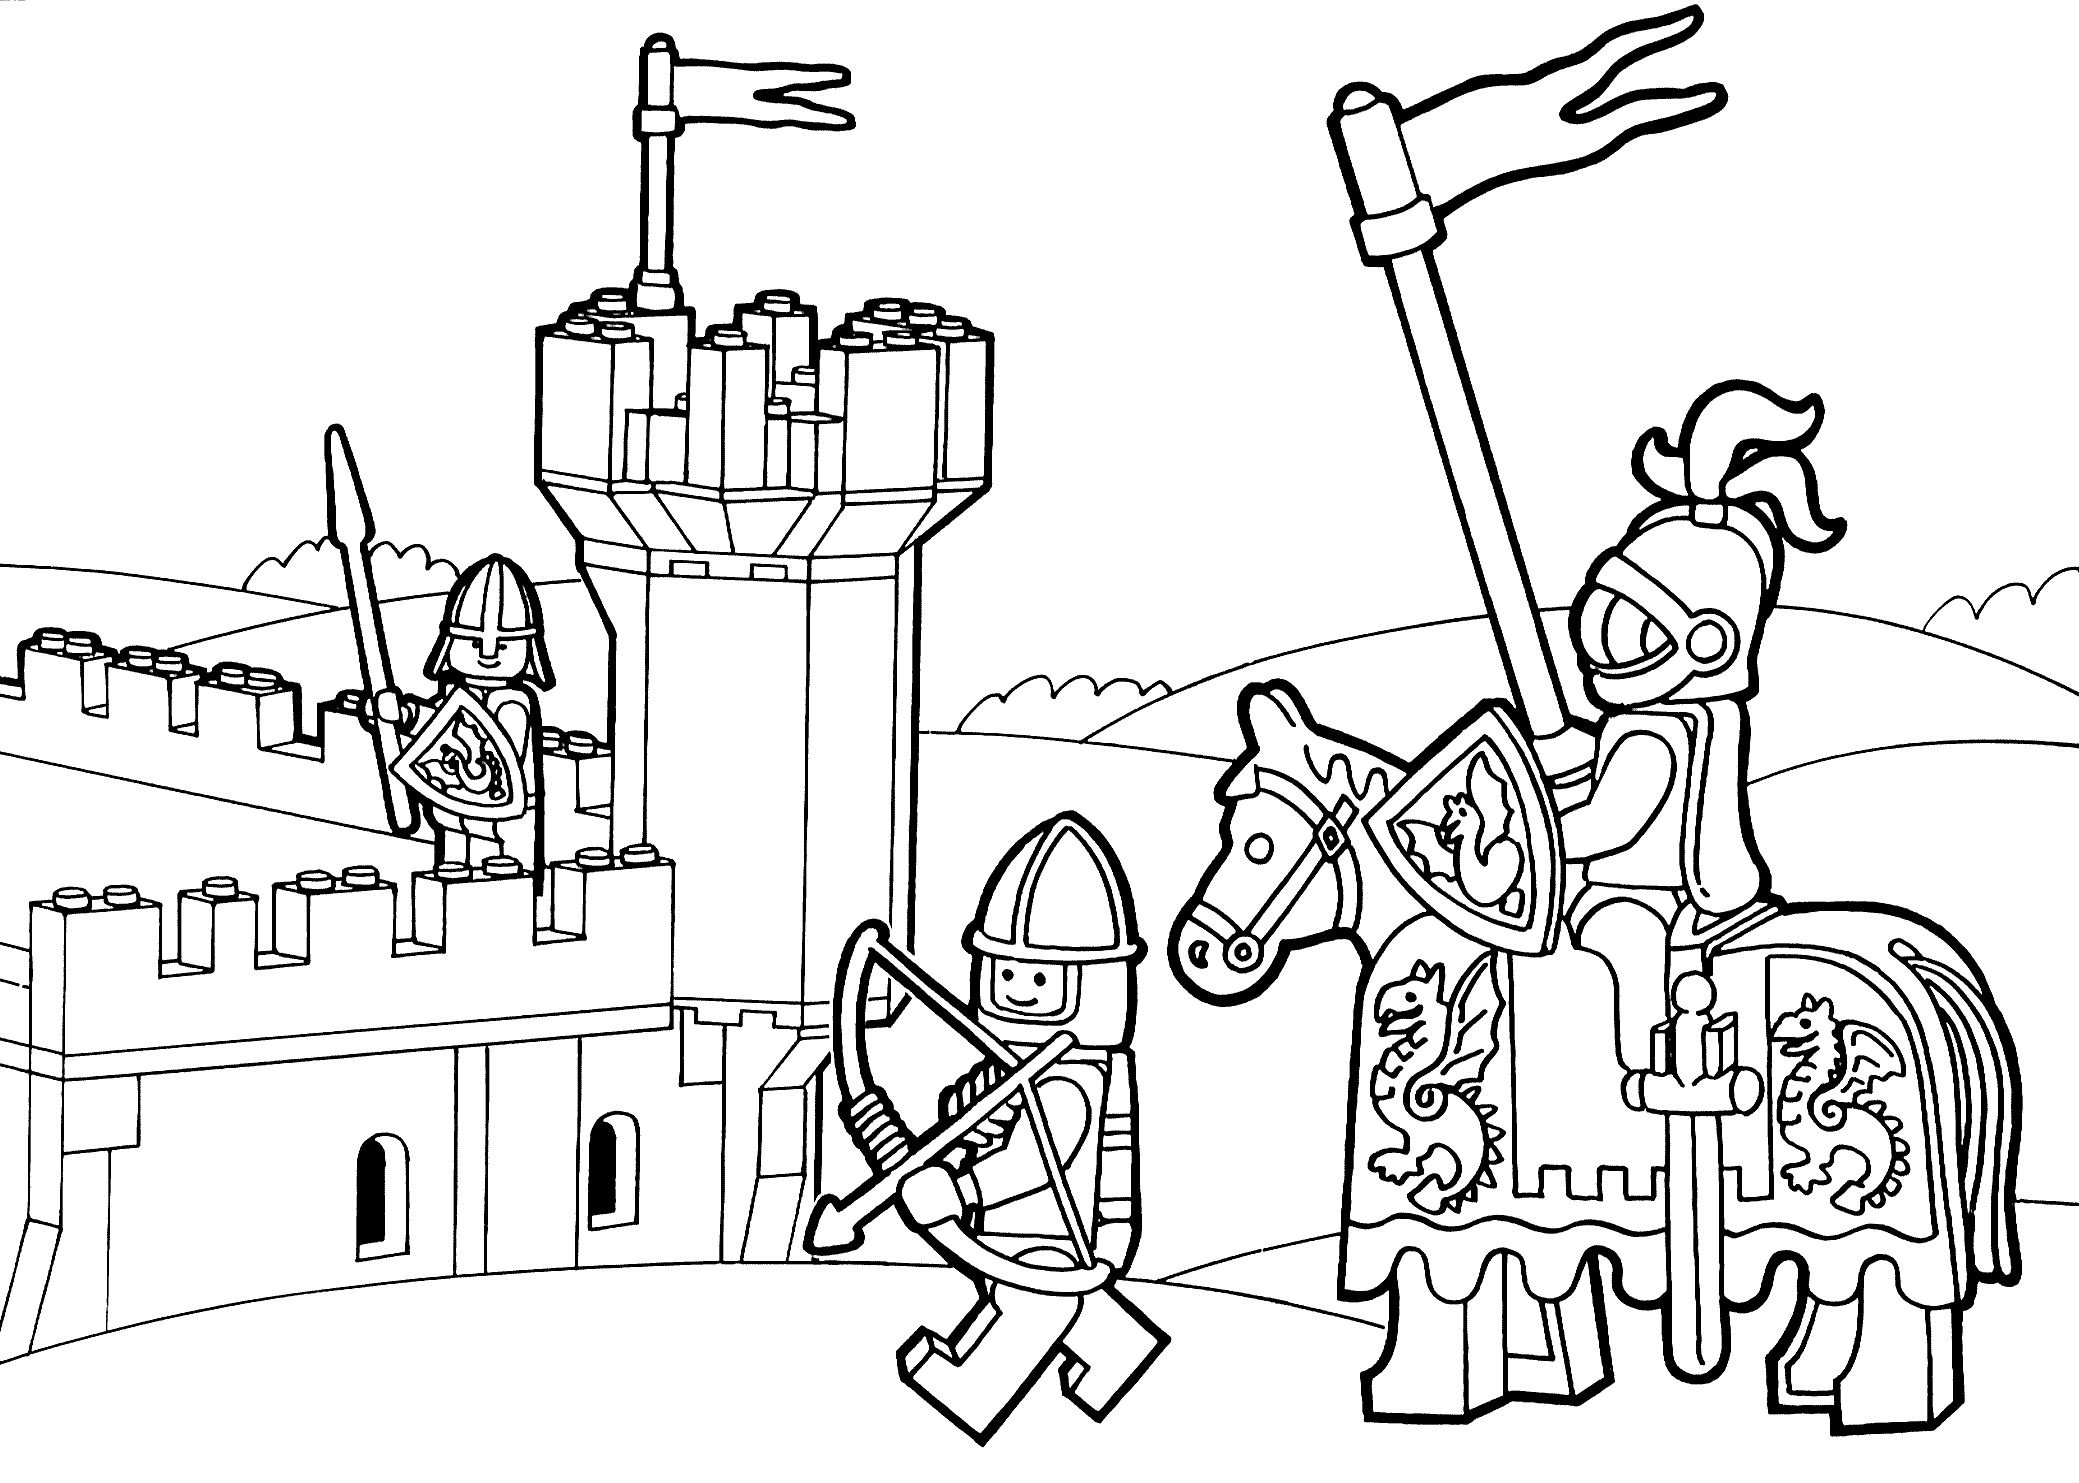 Lego Duplo Knights Coloring Page For Kids Printable Free Lego - Free Printable Pictures Of Knights